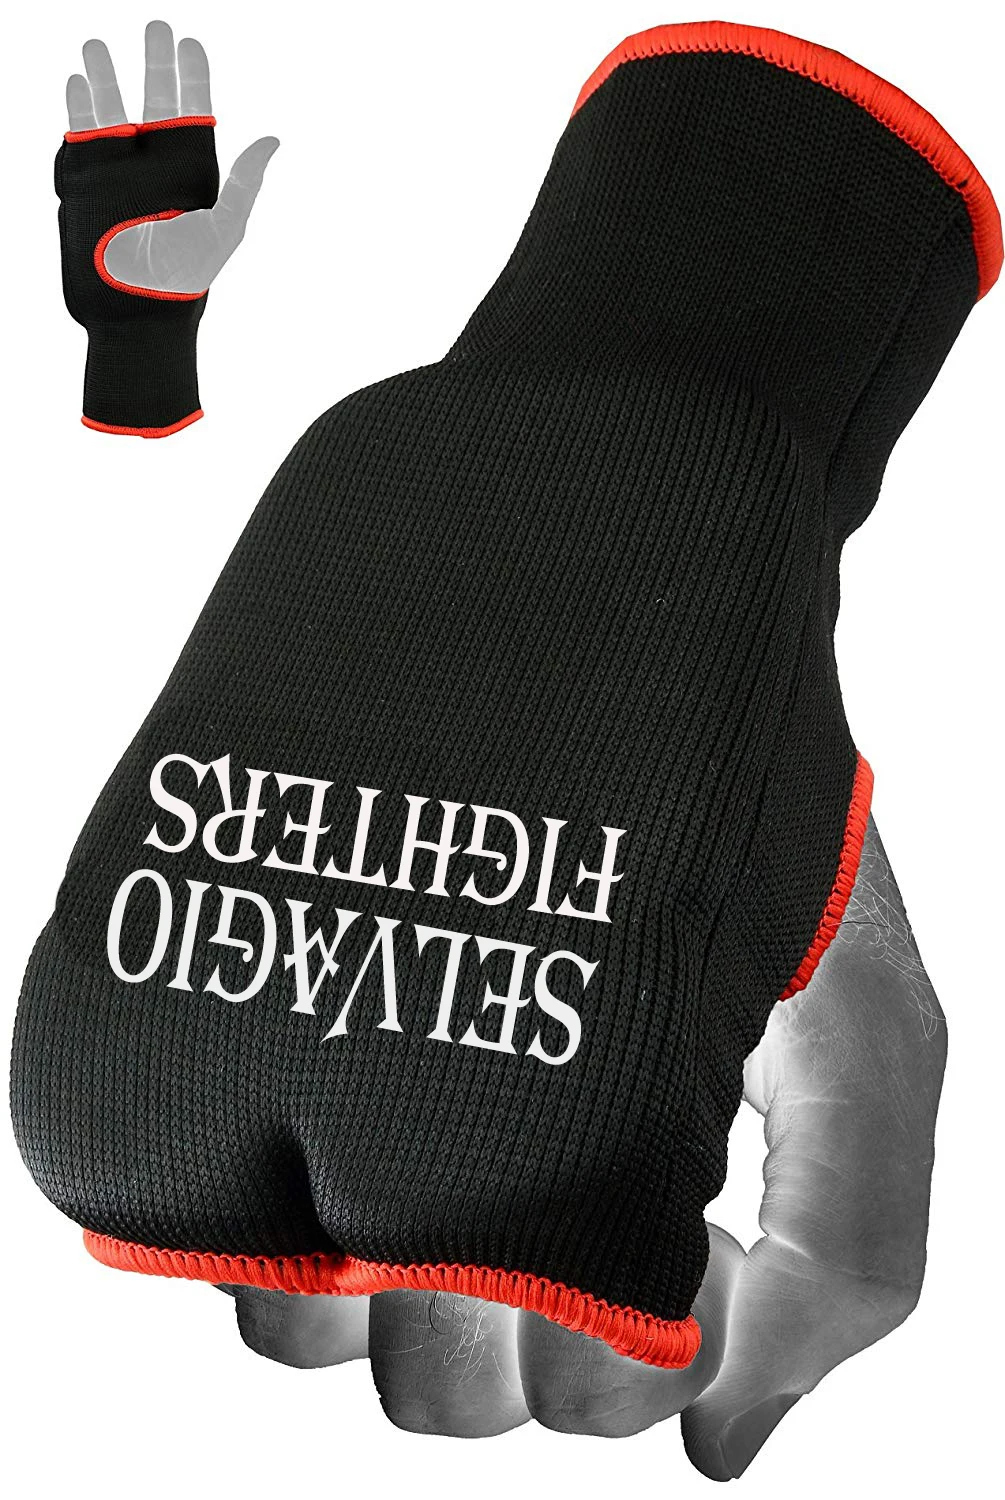 KARATE Hand Mitts  BLACK  Martial Arts Protection Elasticated 